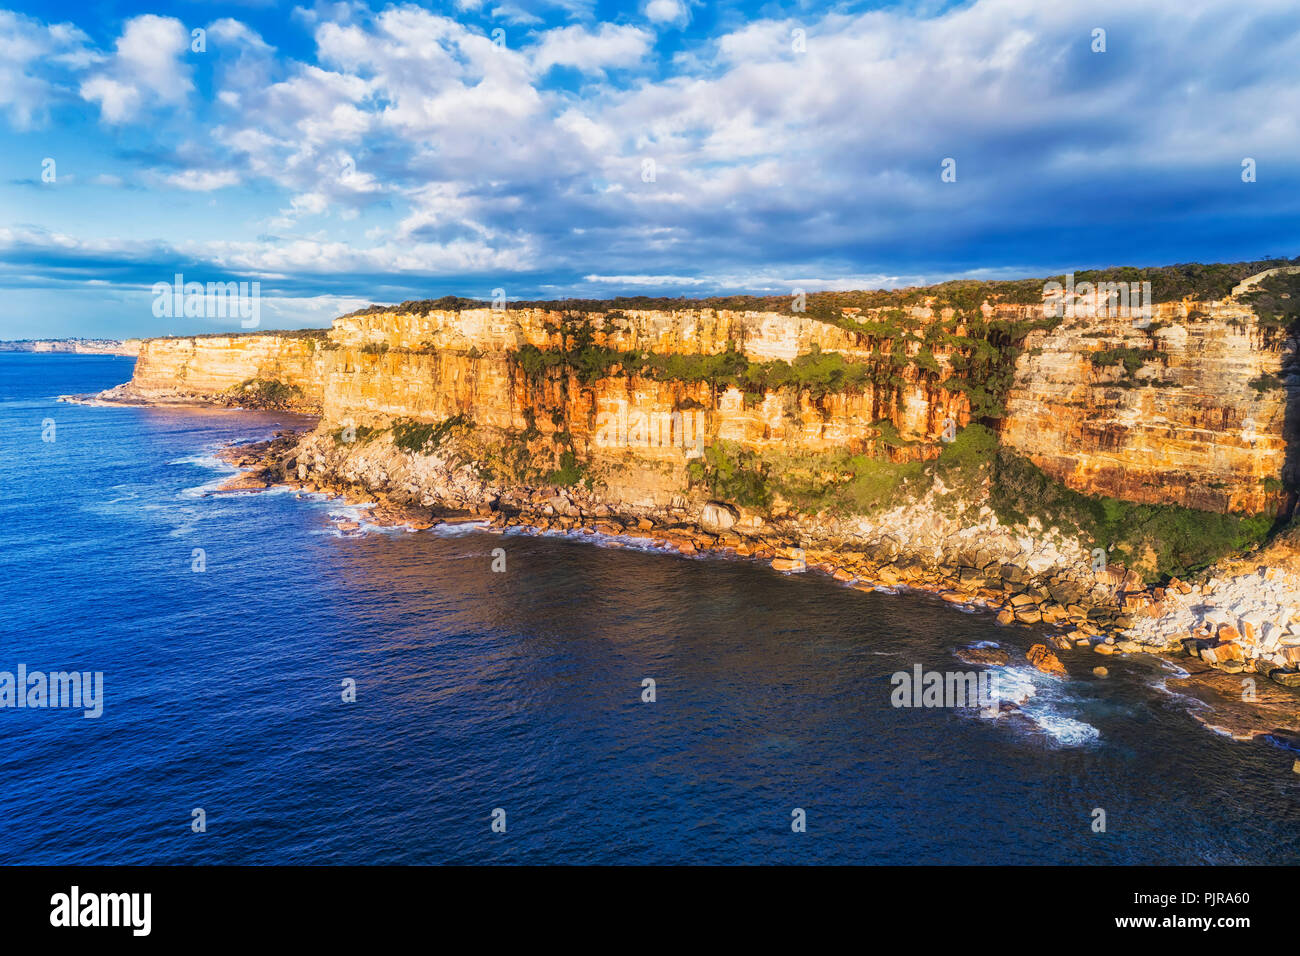 Tall eroded rugged sandstone cliffs of Sydney's North head at the entrance to Sydney harbour hit by endless waves of Pacific ocean lit by warm morning Stock Photo